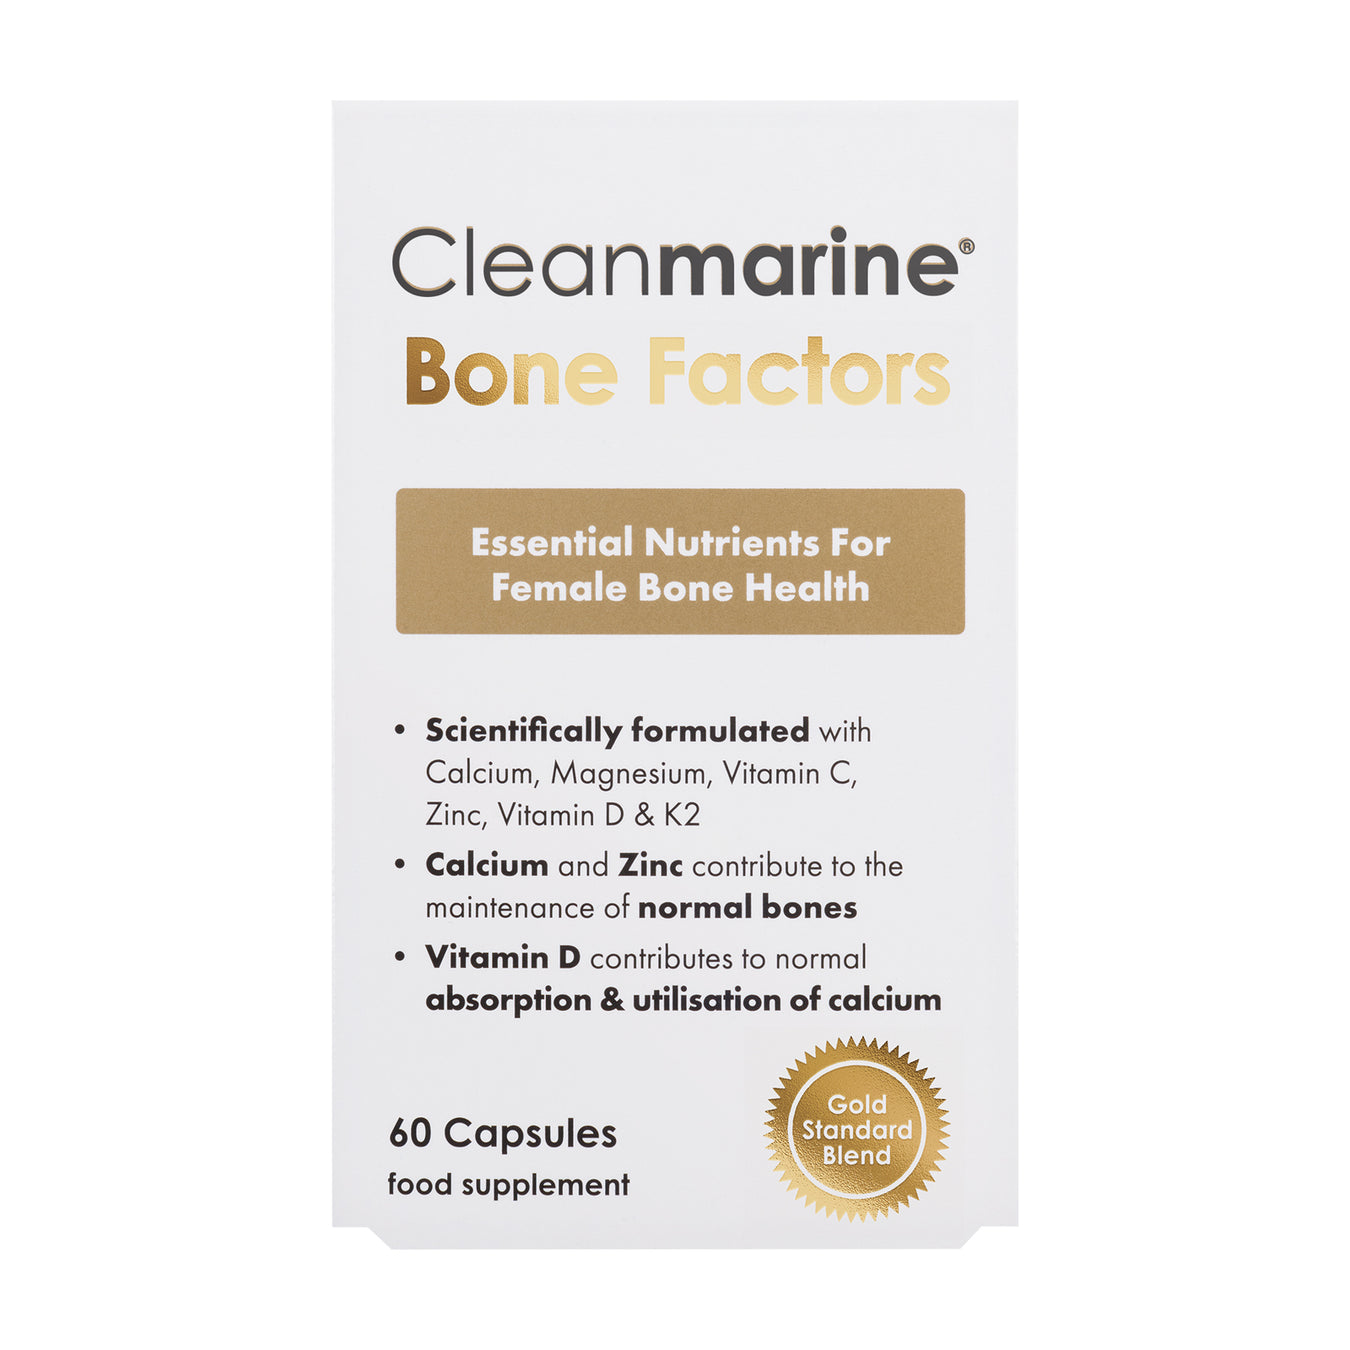 Cleanmarine - All Products